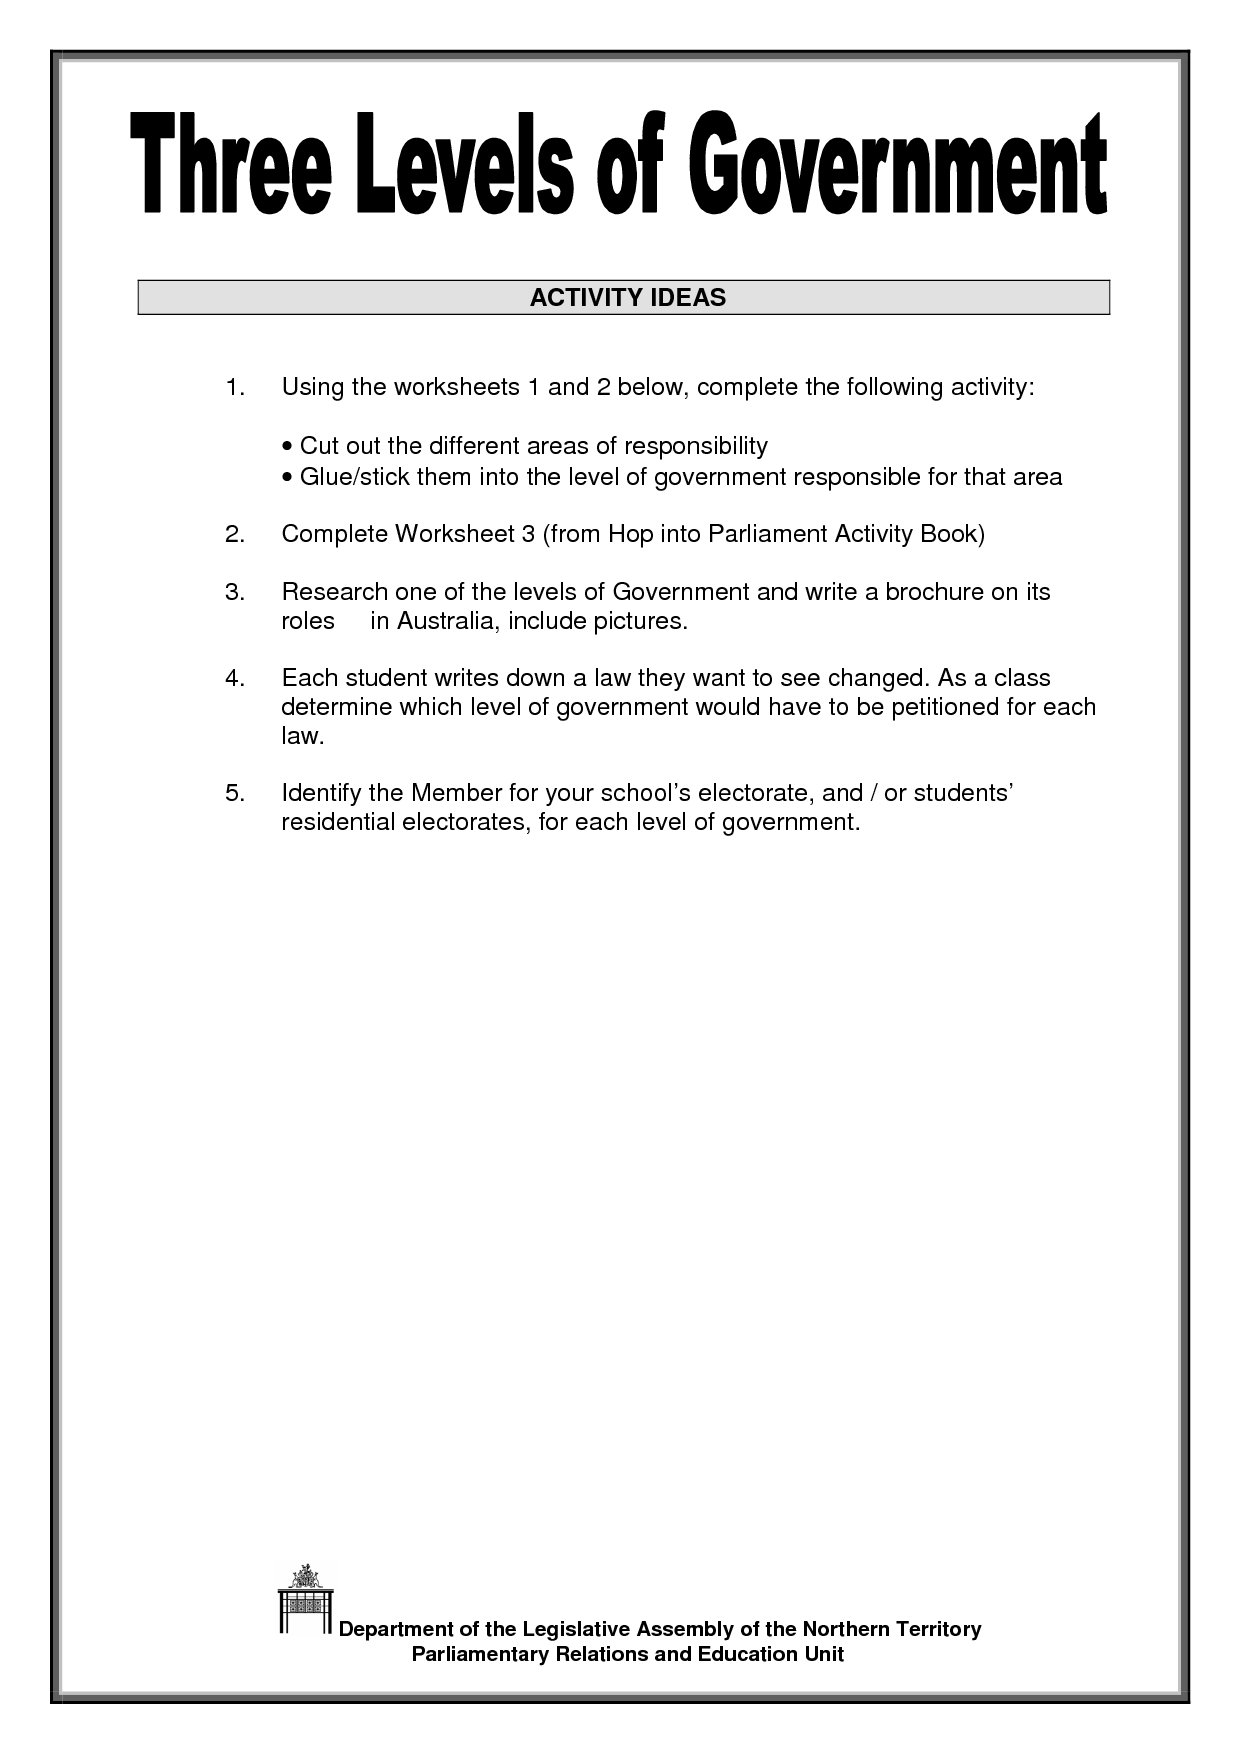 Government Worksheets Image